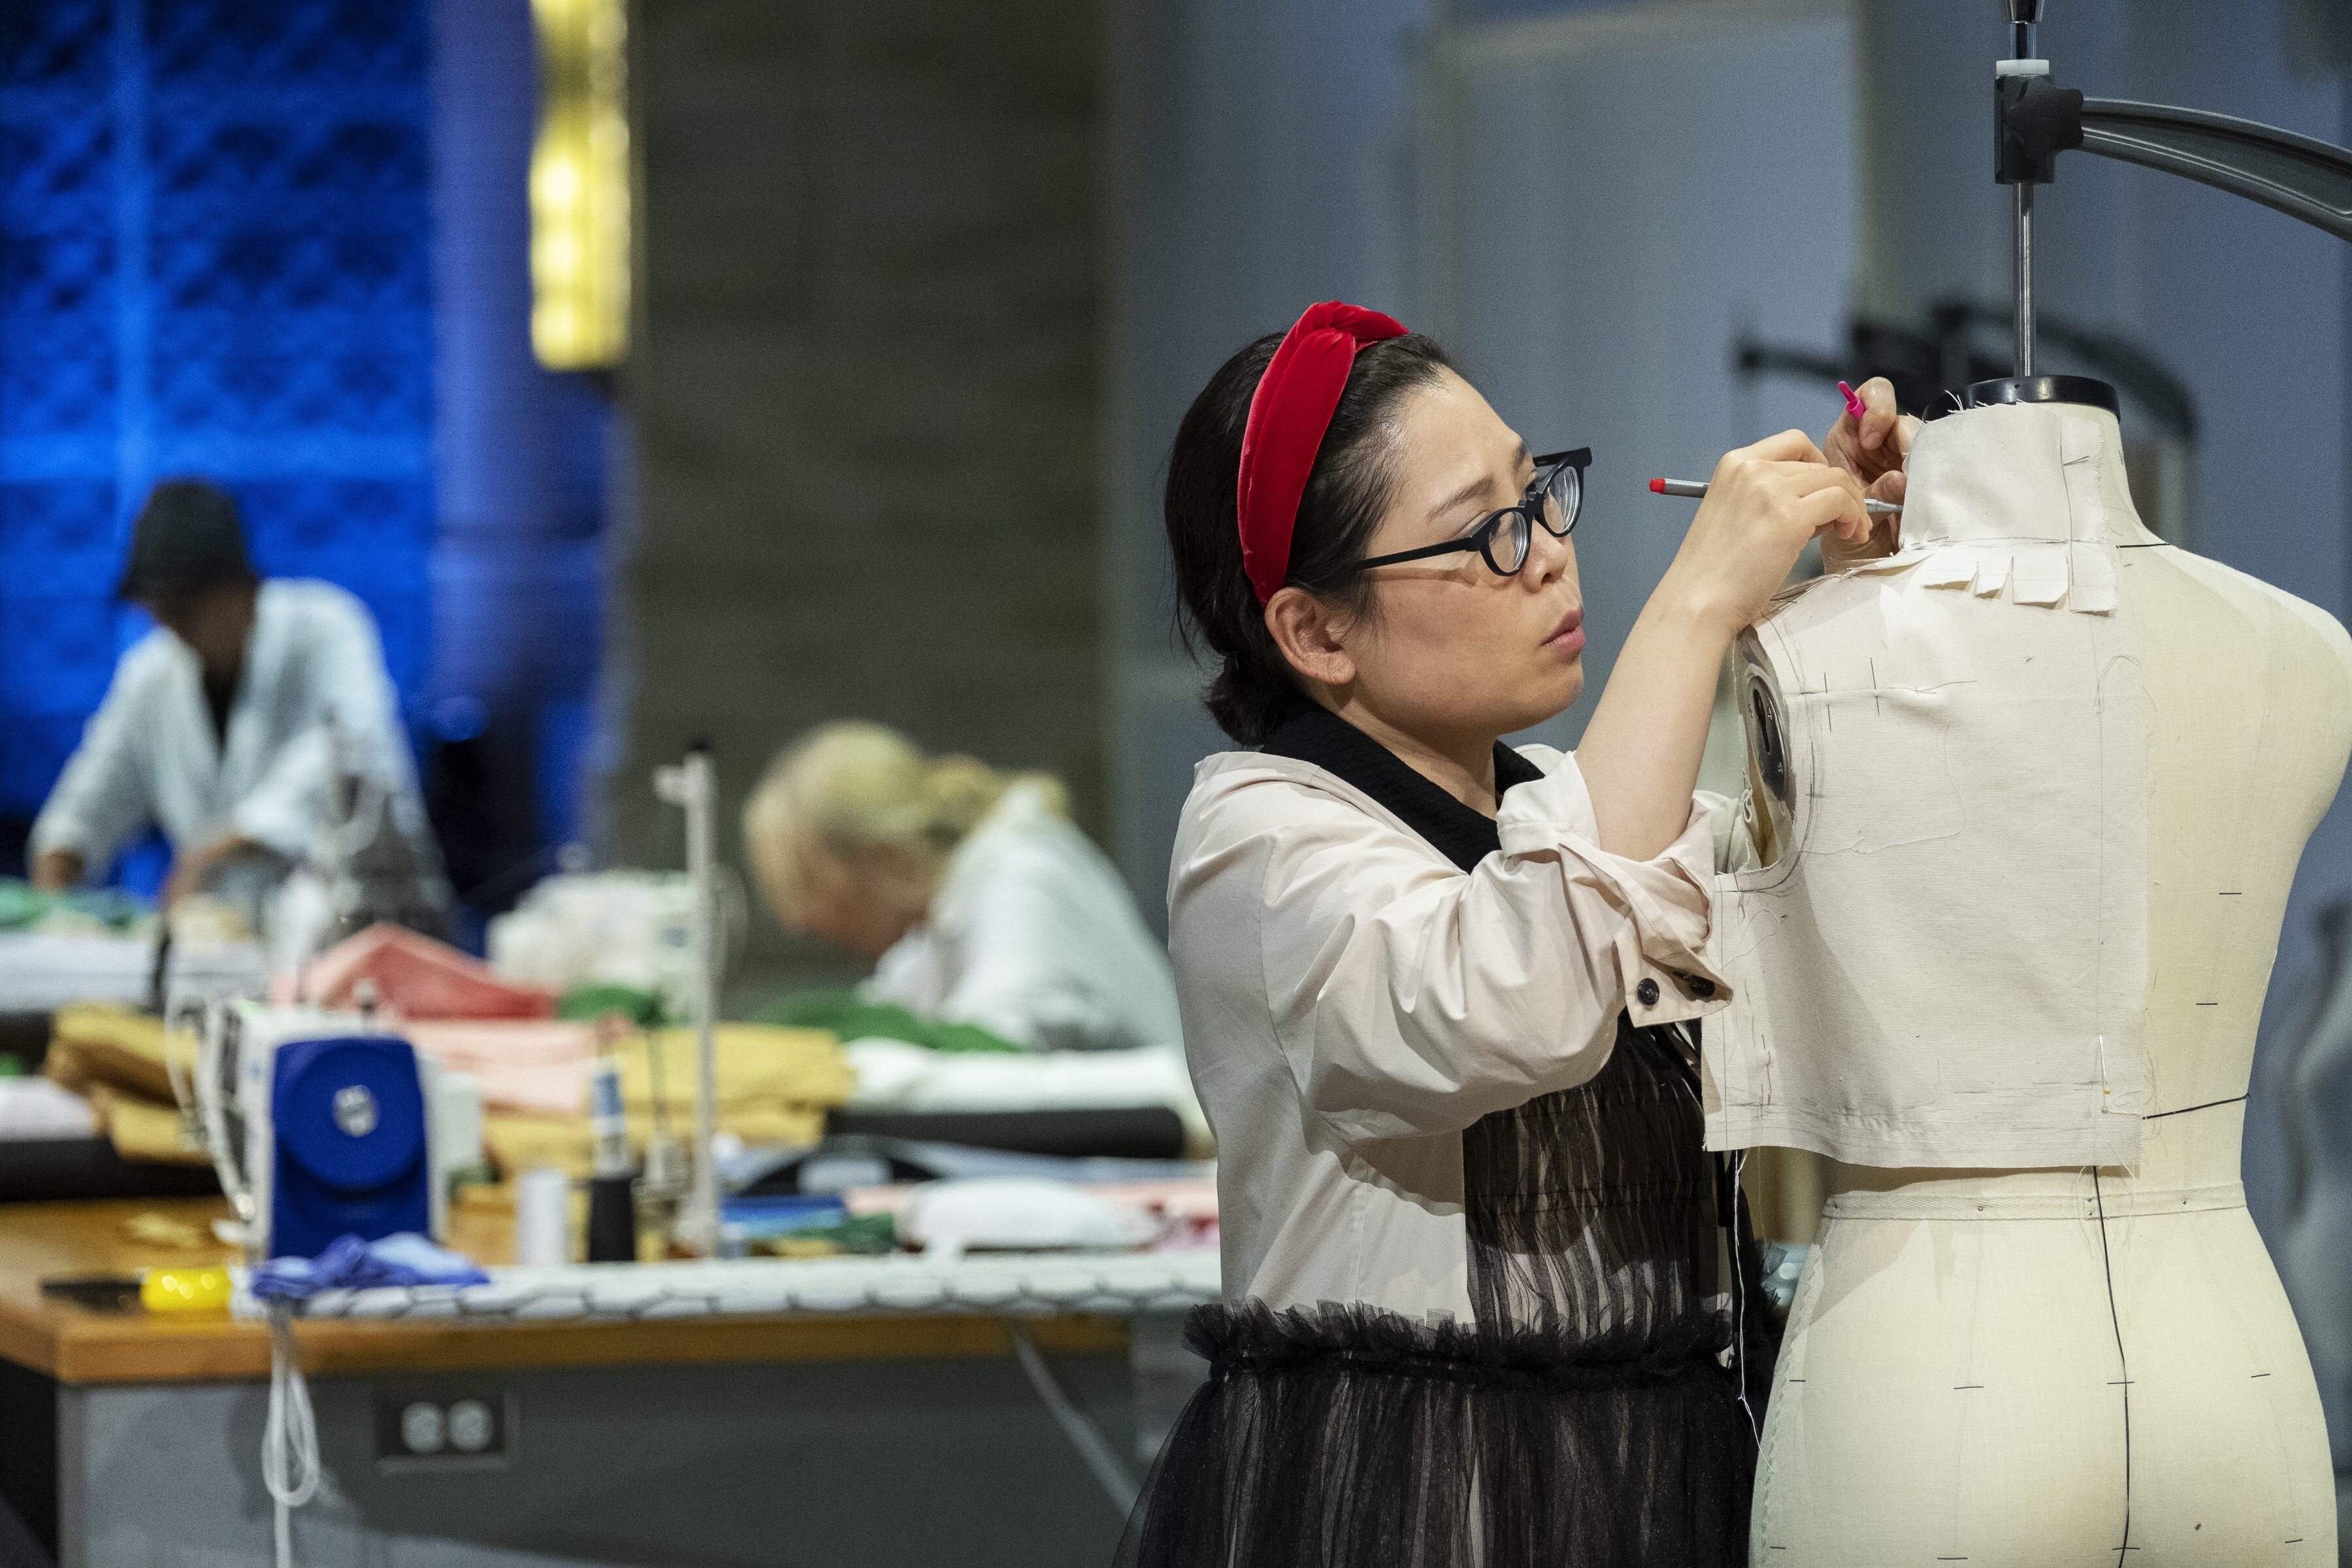 Minju Kim competing in Netflix’s reality show, Next in Fashion. She is among an exciting group of influential South Korean designers who are making waves in the fashion industry. Photo: Handout